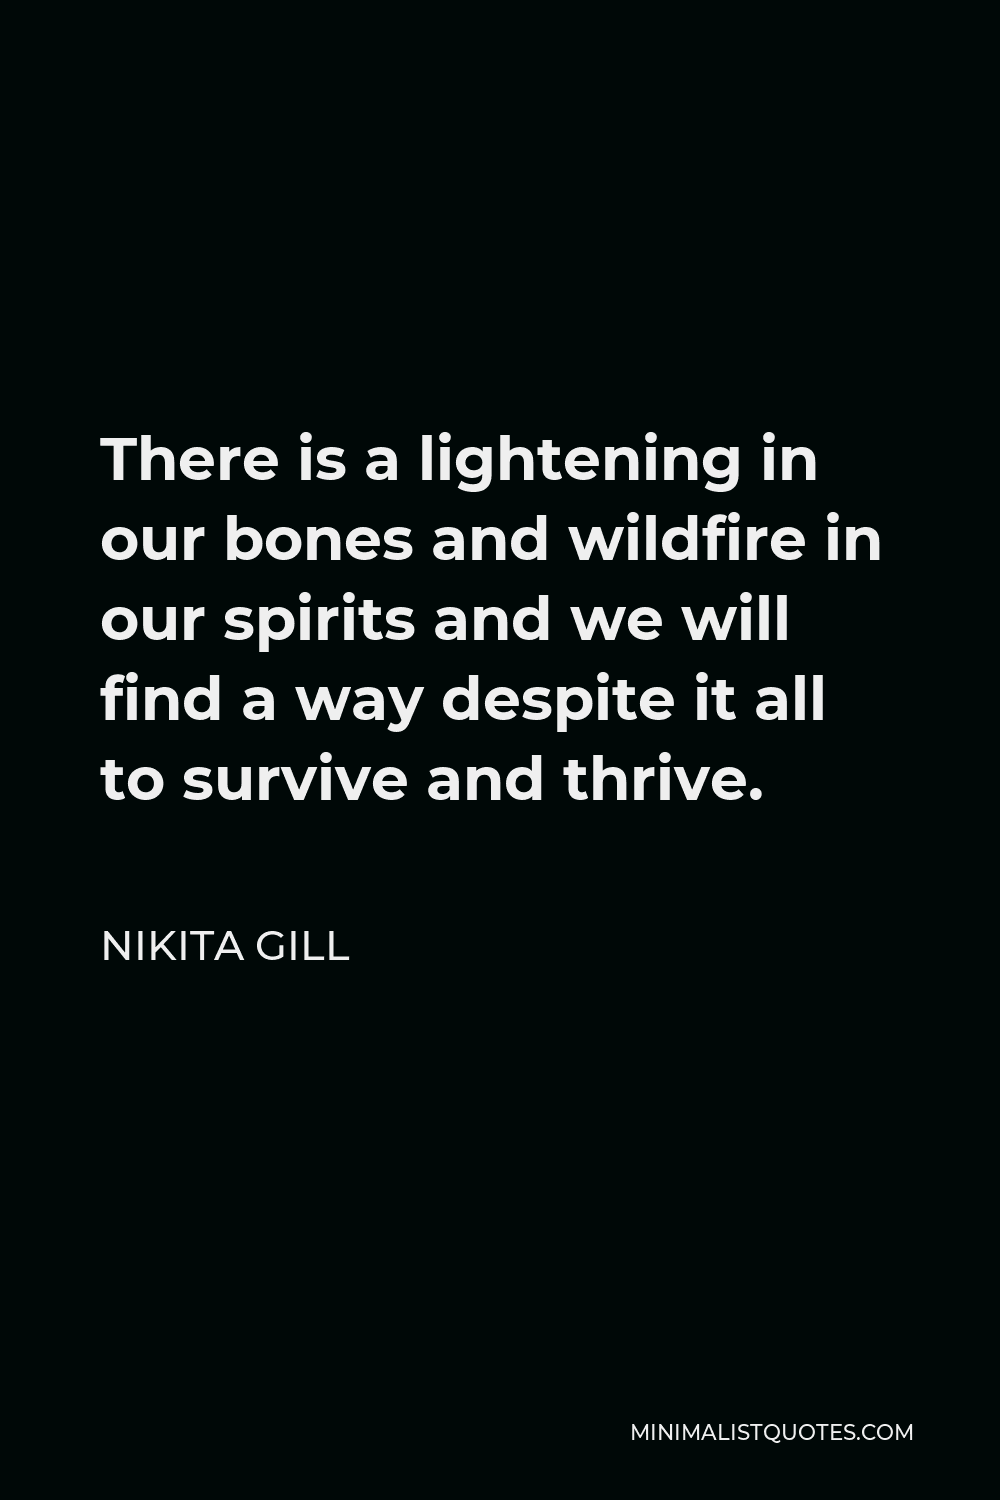 Nikita Gill Quote - There is a lightening in our bones and wildfire in our spirits and we will find a way despite it all to survive and thrive.